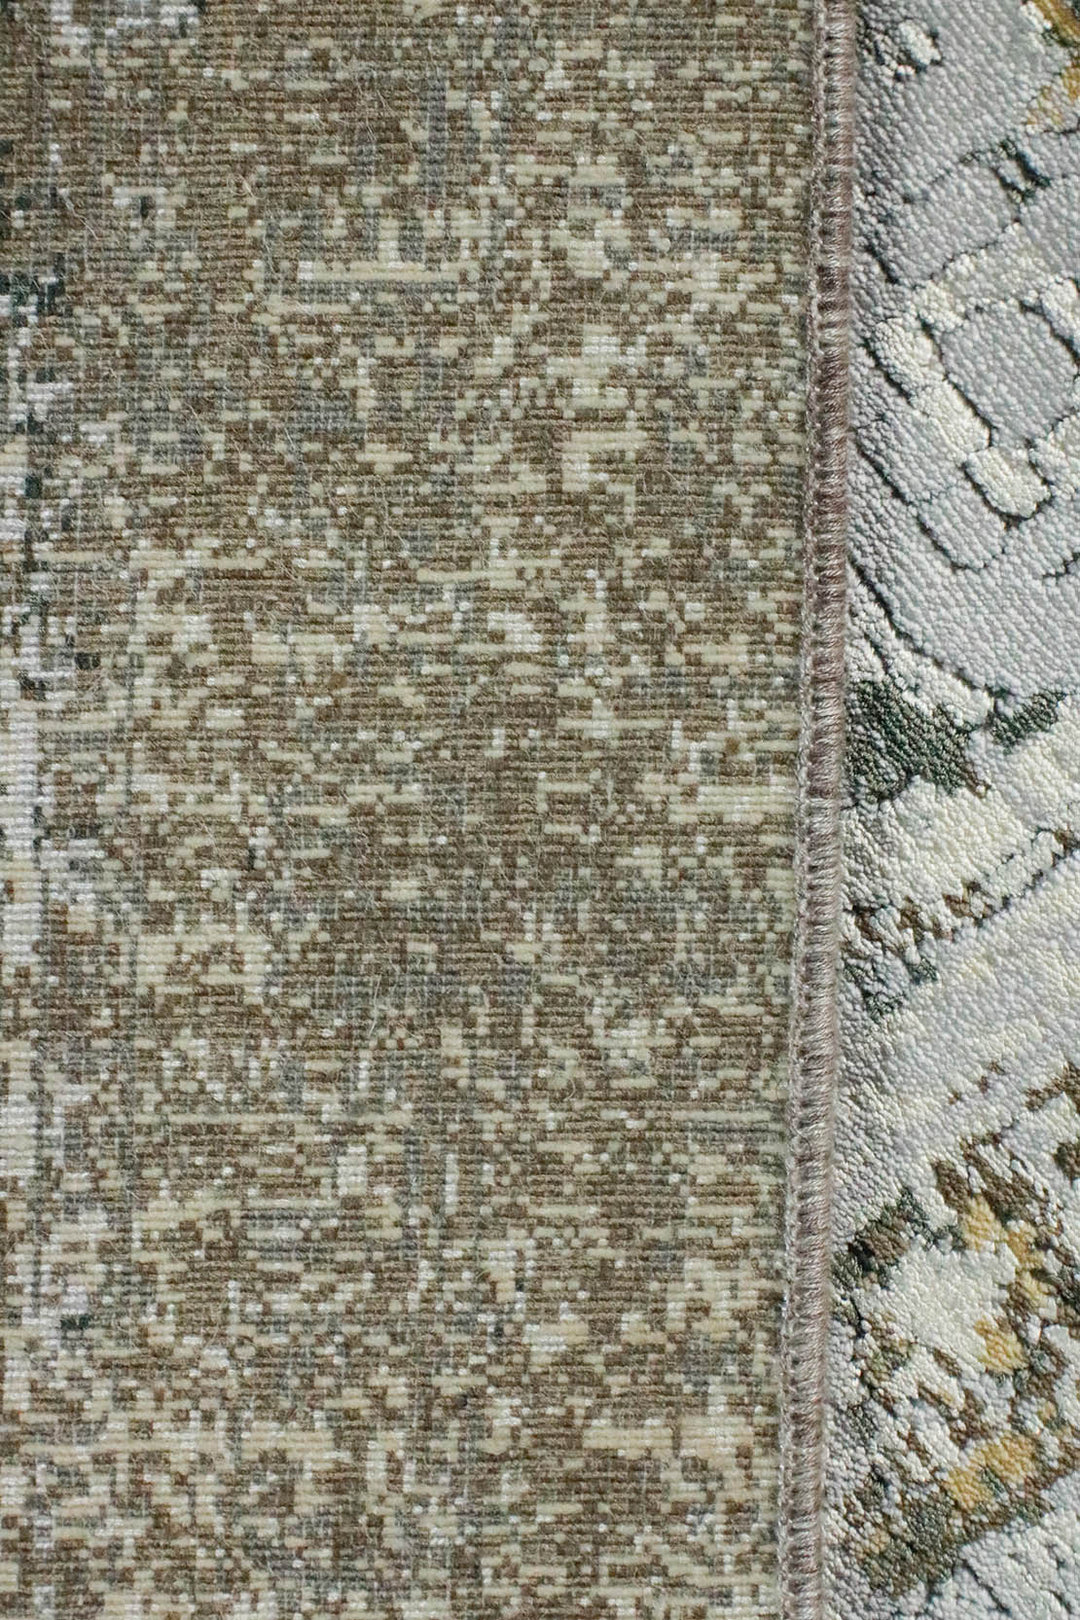 Premium Quality Turkish Brooklyn Rug - Gray - 5.2 x 7.5 FT - Resilient Construction for Long-Lasting Use - V Surfaces